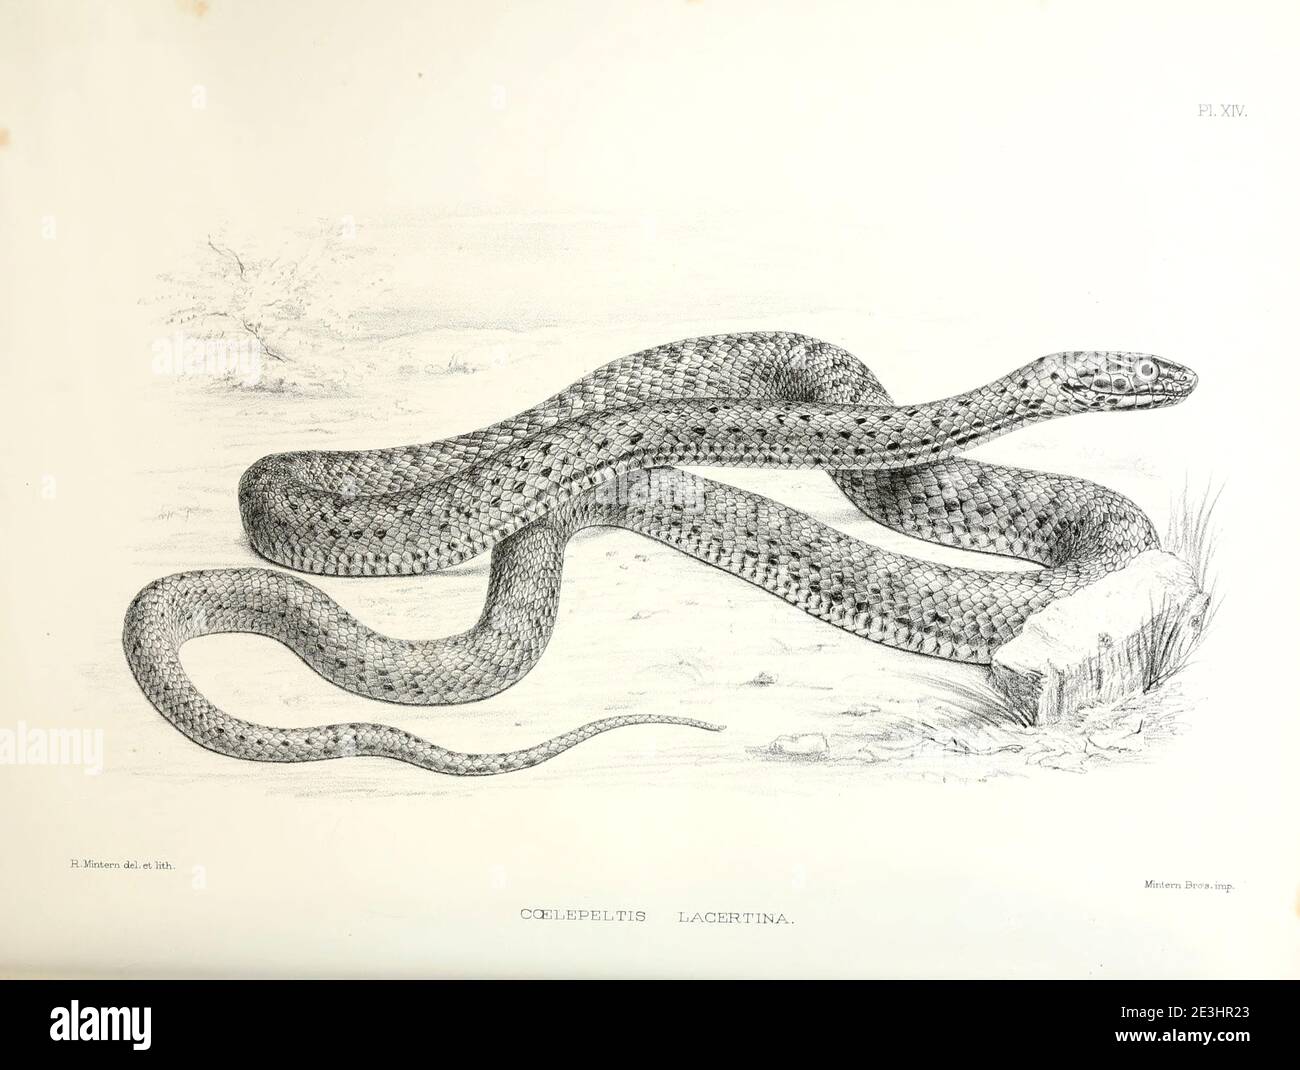 Malpolon monspessulanus [Here as Coelopeltis lacertina], commonly known as the Montpellier snake, is a species of mildly venomous rear-fanged colubrids. From the survey of western Palestine. The fauna and flora of Palestine by Tristram, H. B. (Henry Baker), 1822-1906 Published by The Committee of the Palestine Exploration Fund, London, 1884 Stock Photo